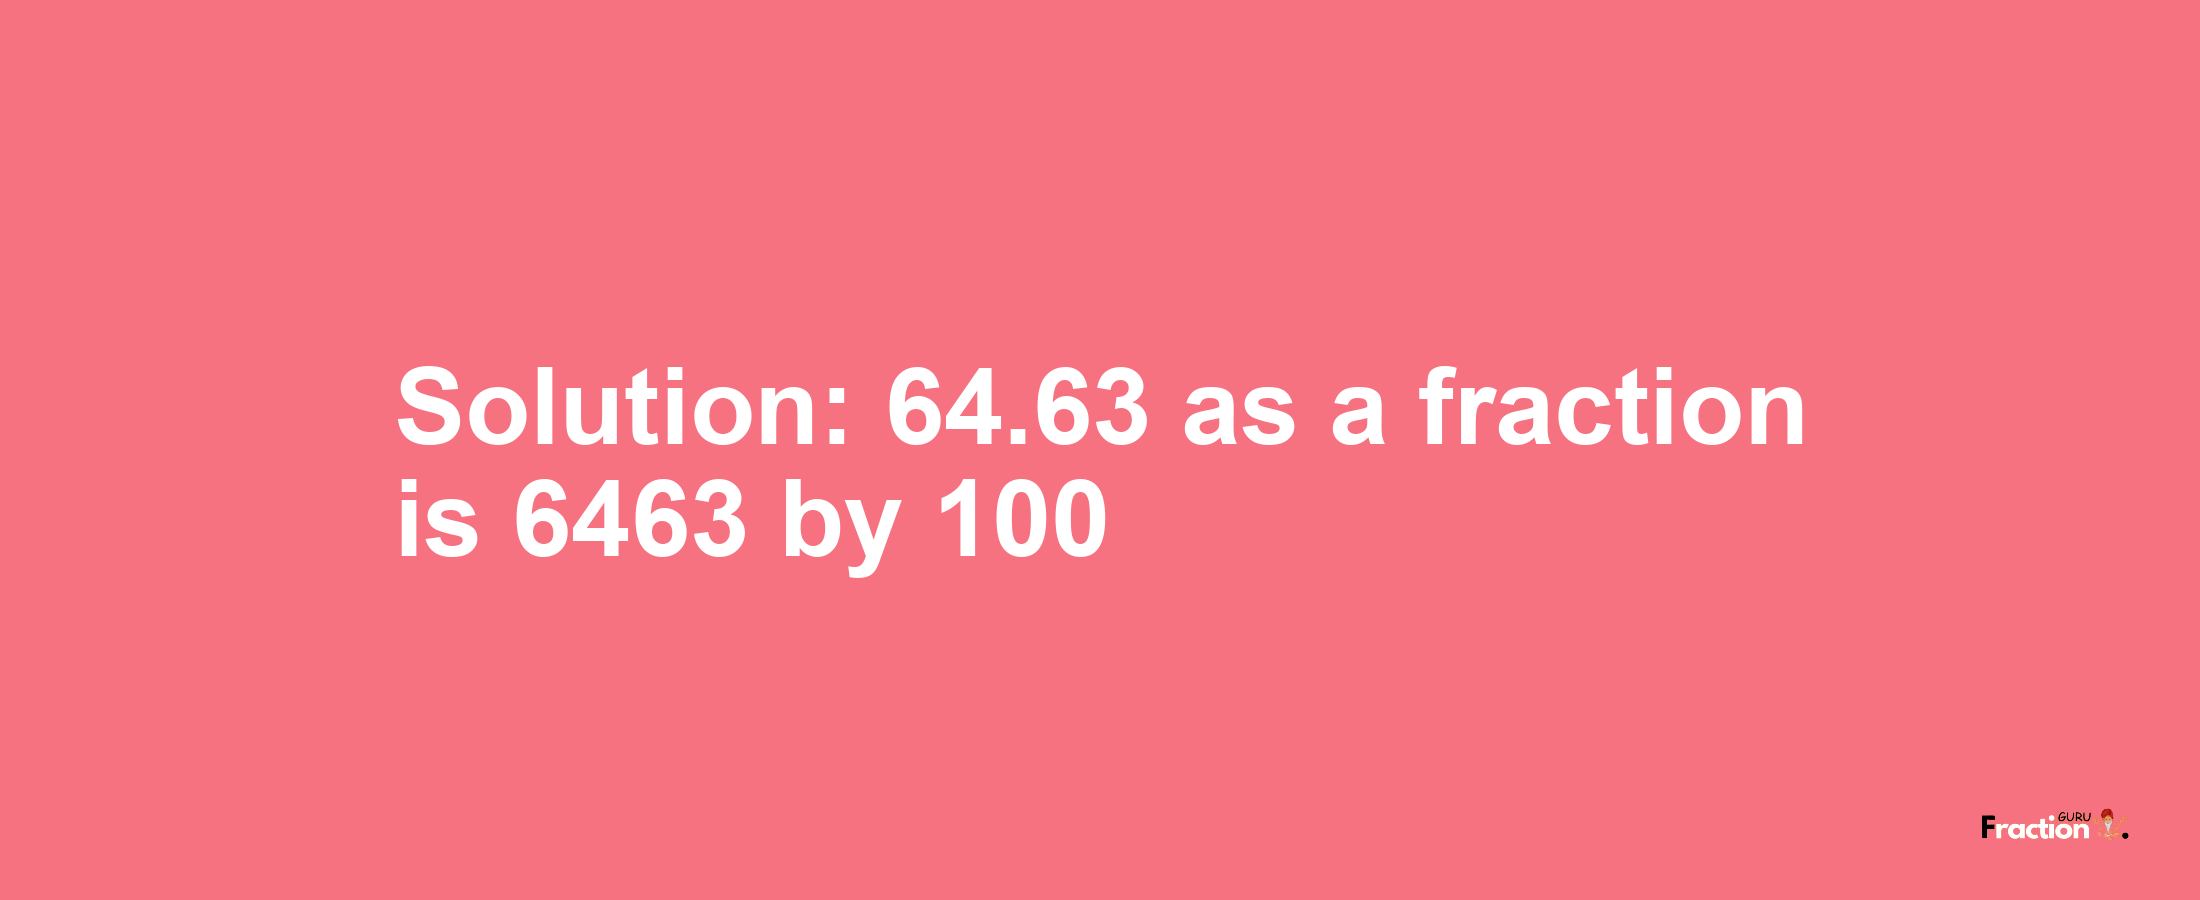 Solution:64.63 as a fraction is 6463/100